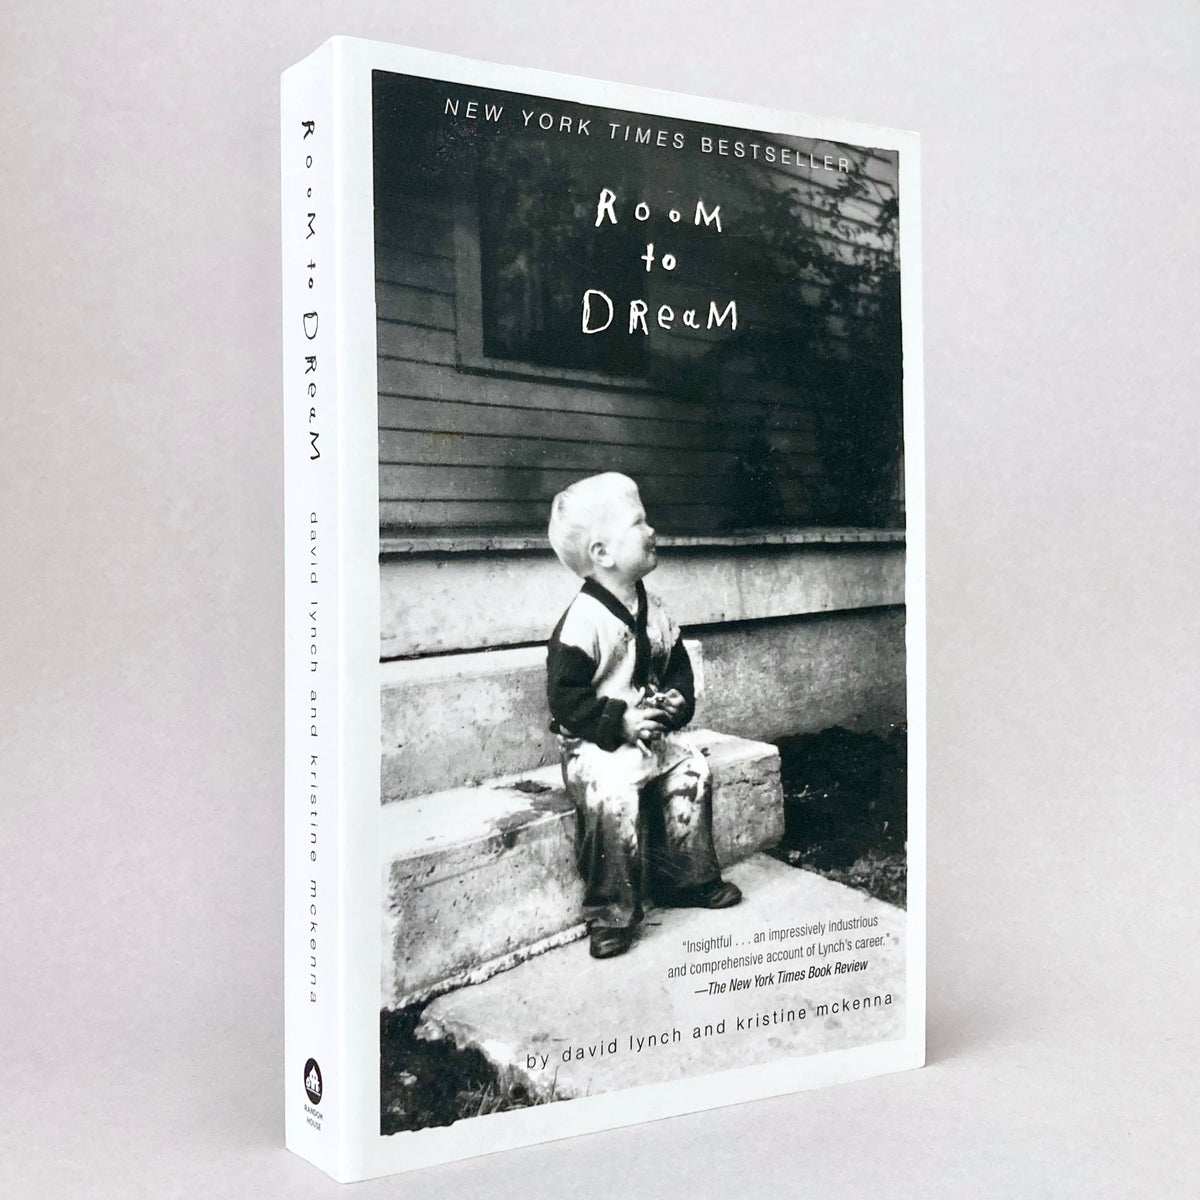 David Lynch: Room to Dream - A Life in Art (Non-mint)